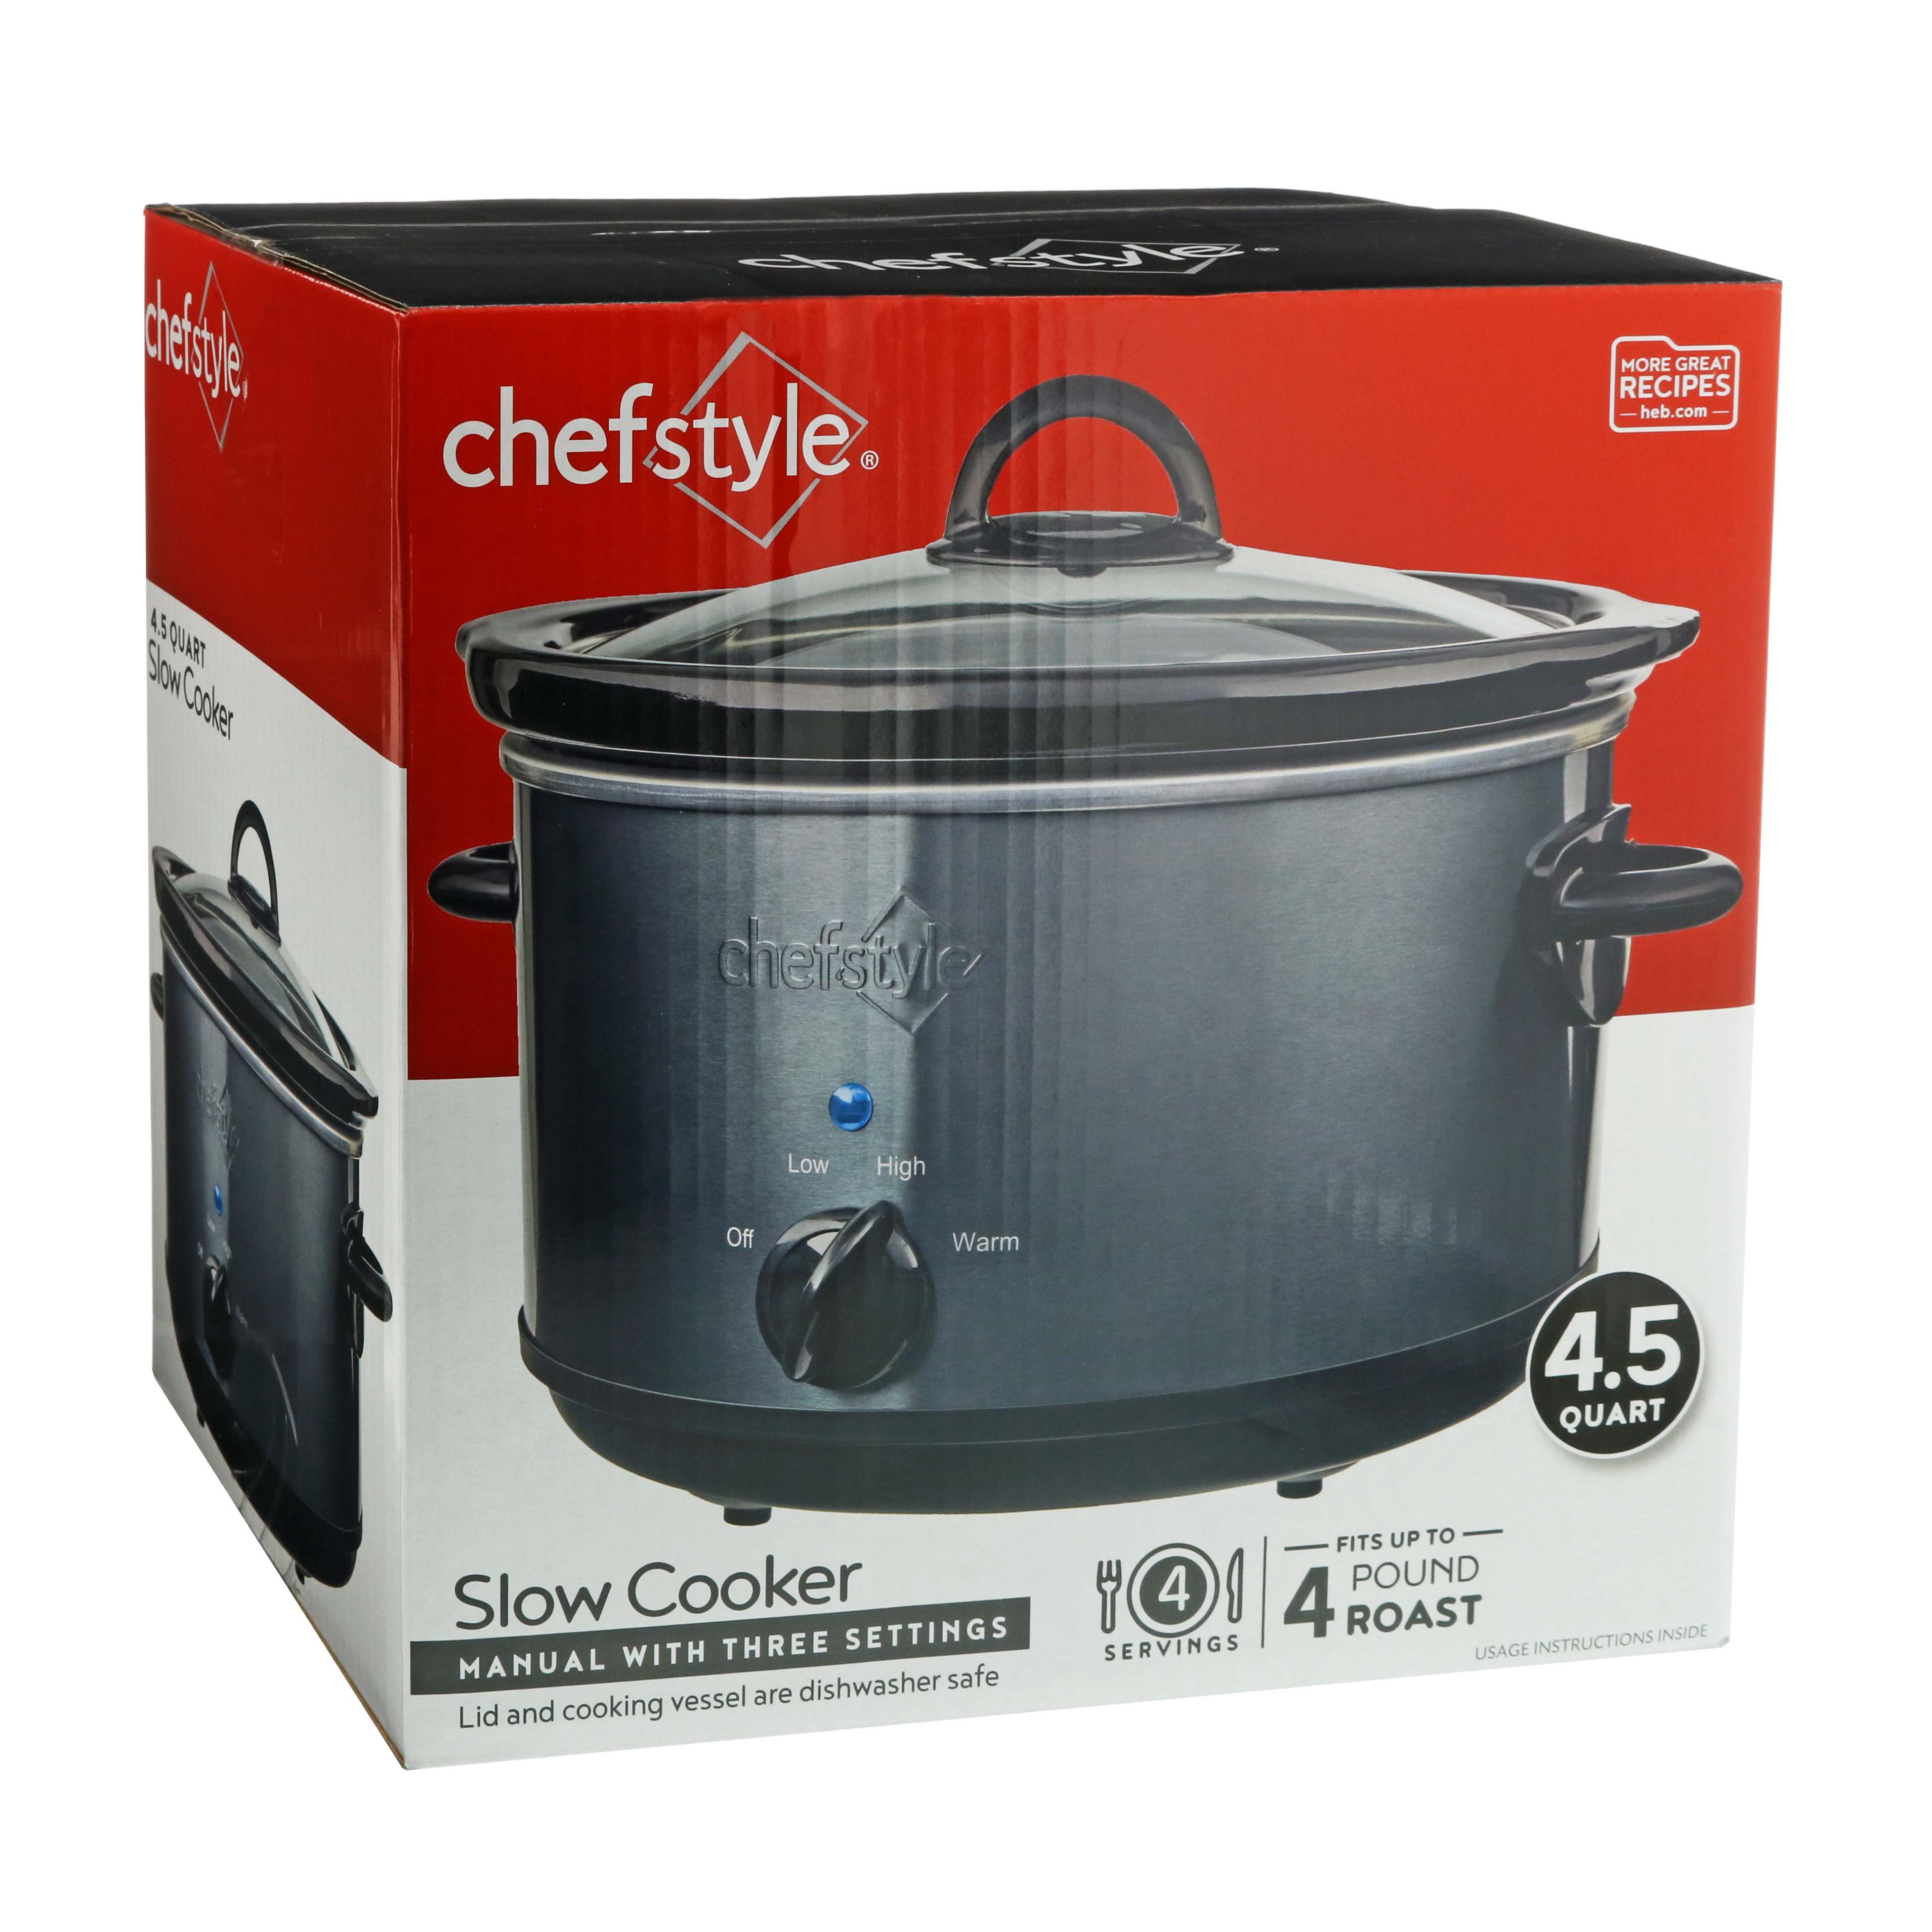 970117929M Better Chef 4 Quart Oval Slow Cooker with Removable Stoneware  Crock in Stainless Steel